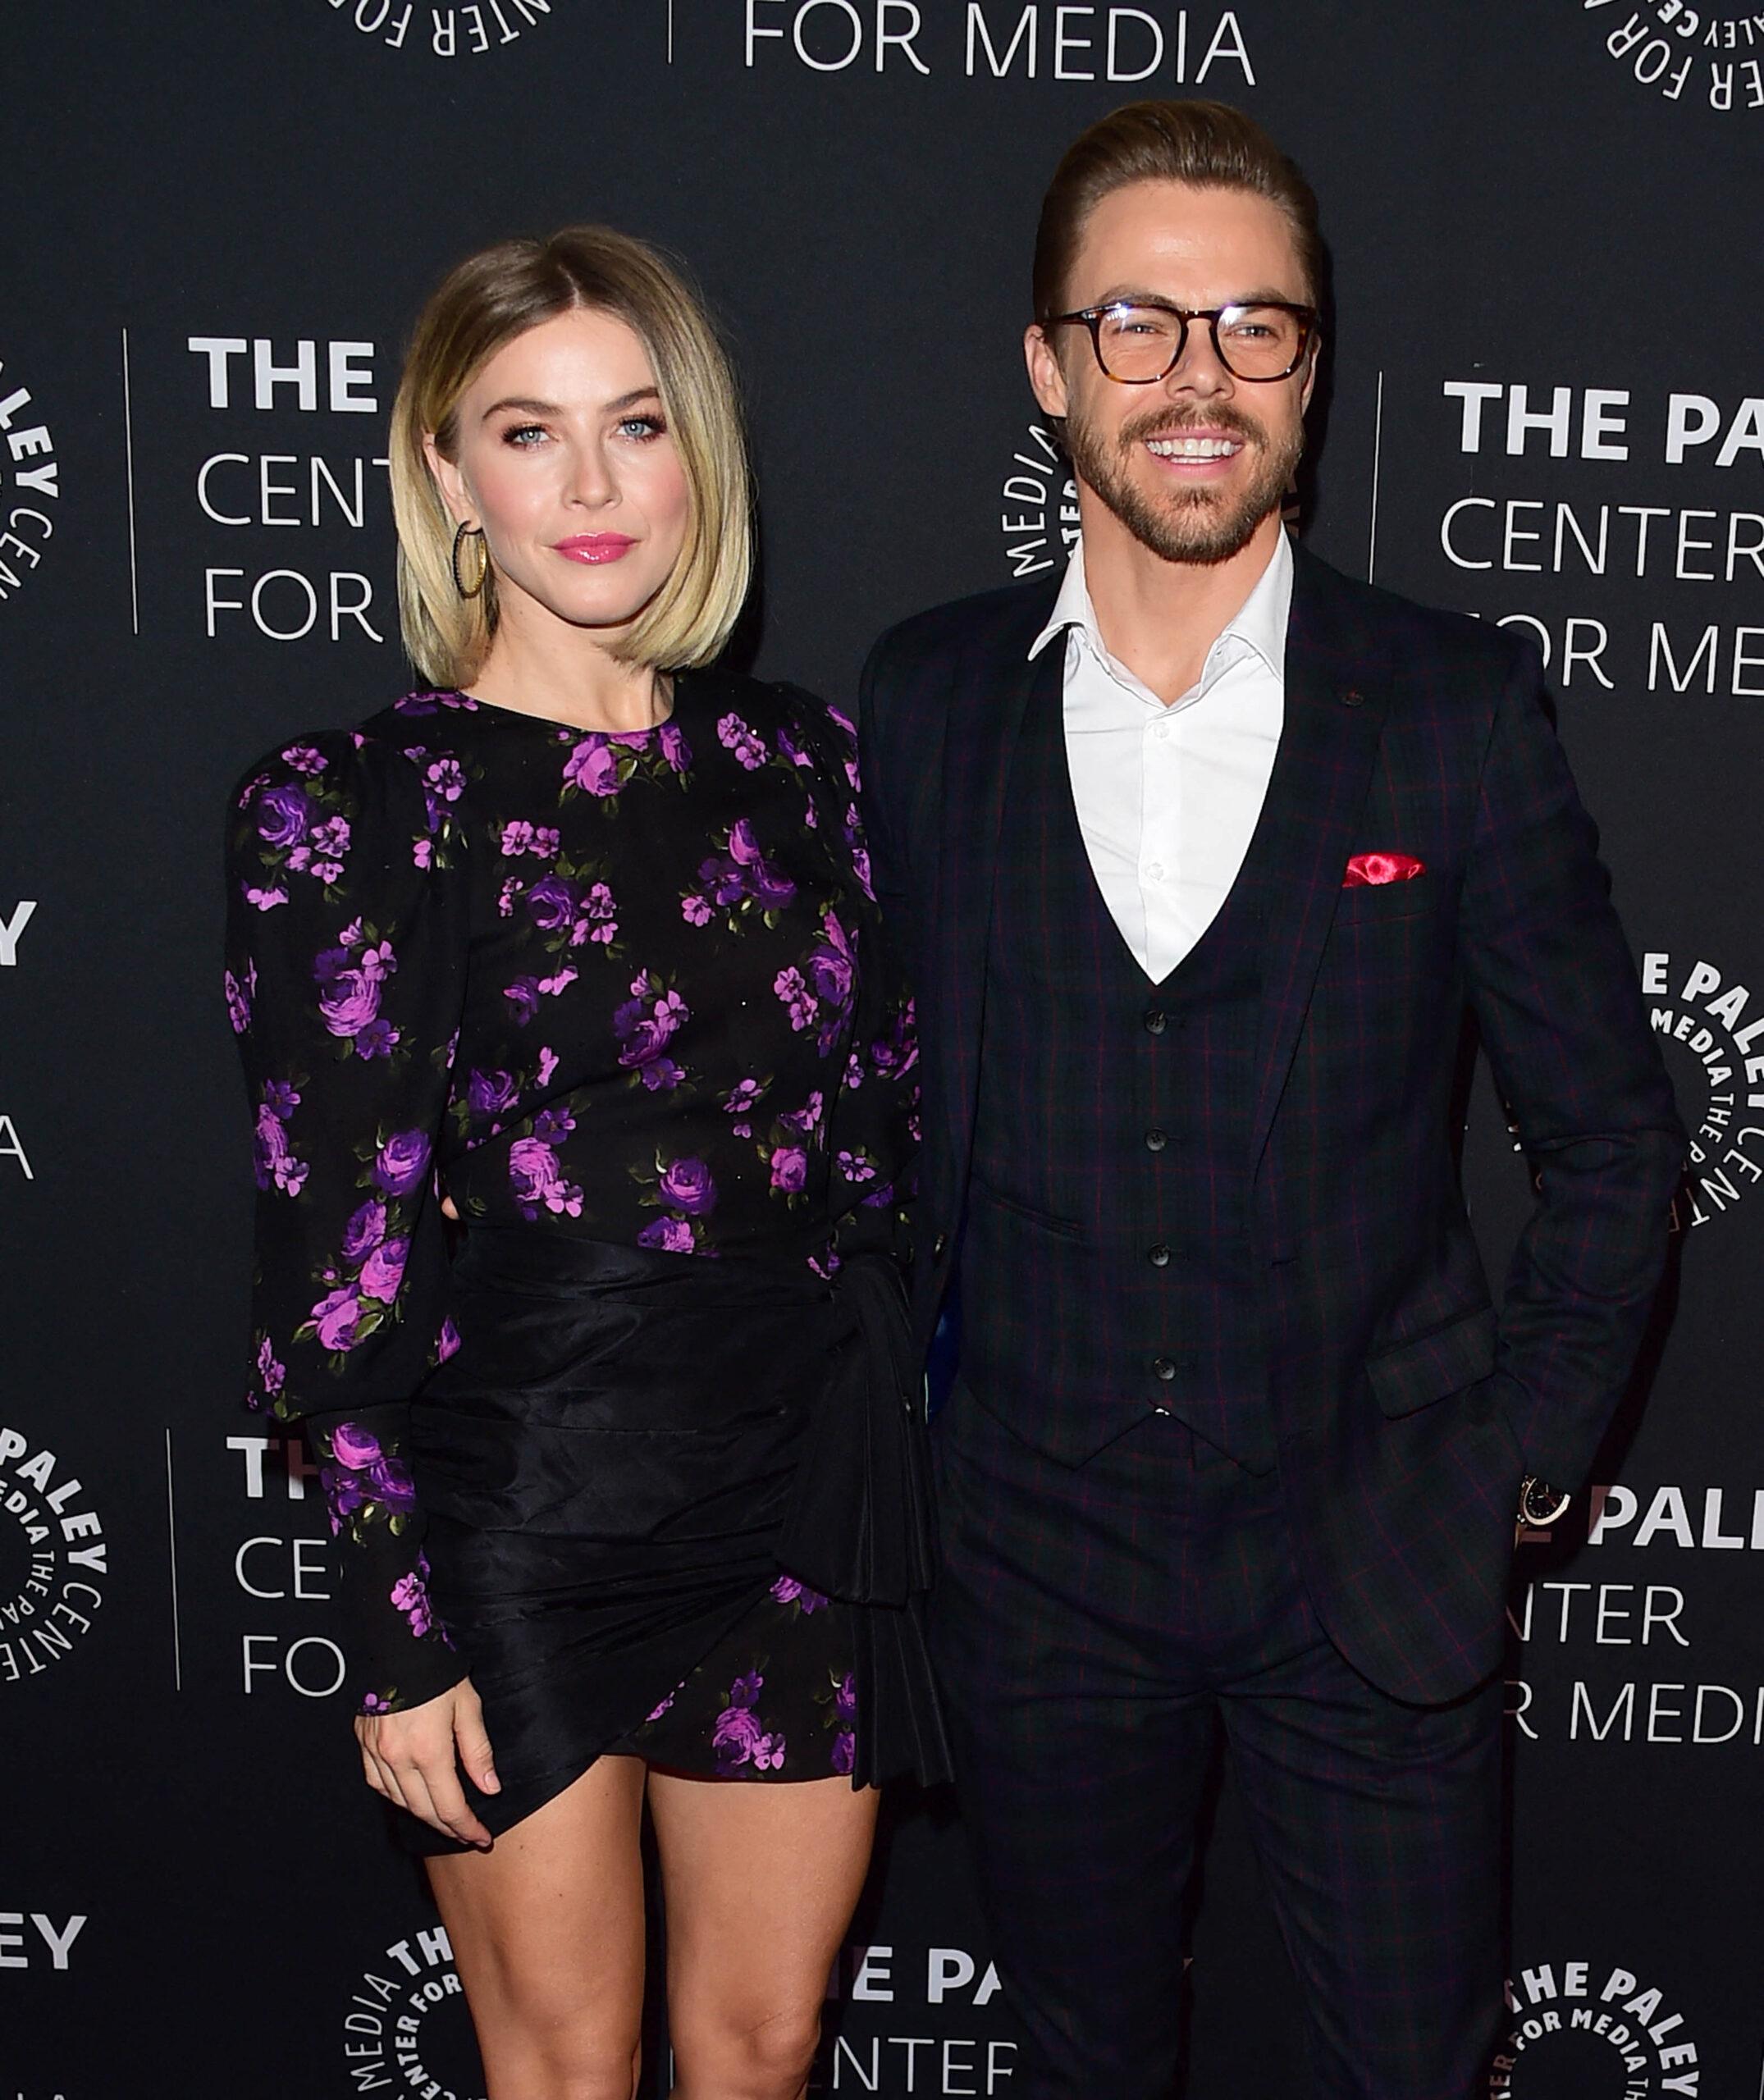 Derek Hough Comments On His Sister Joining The Show